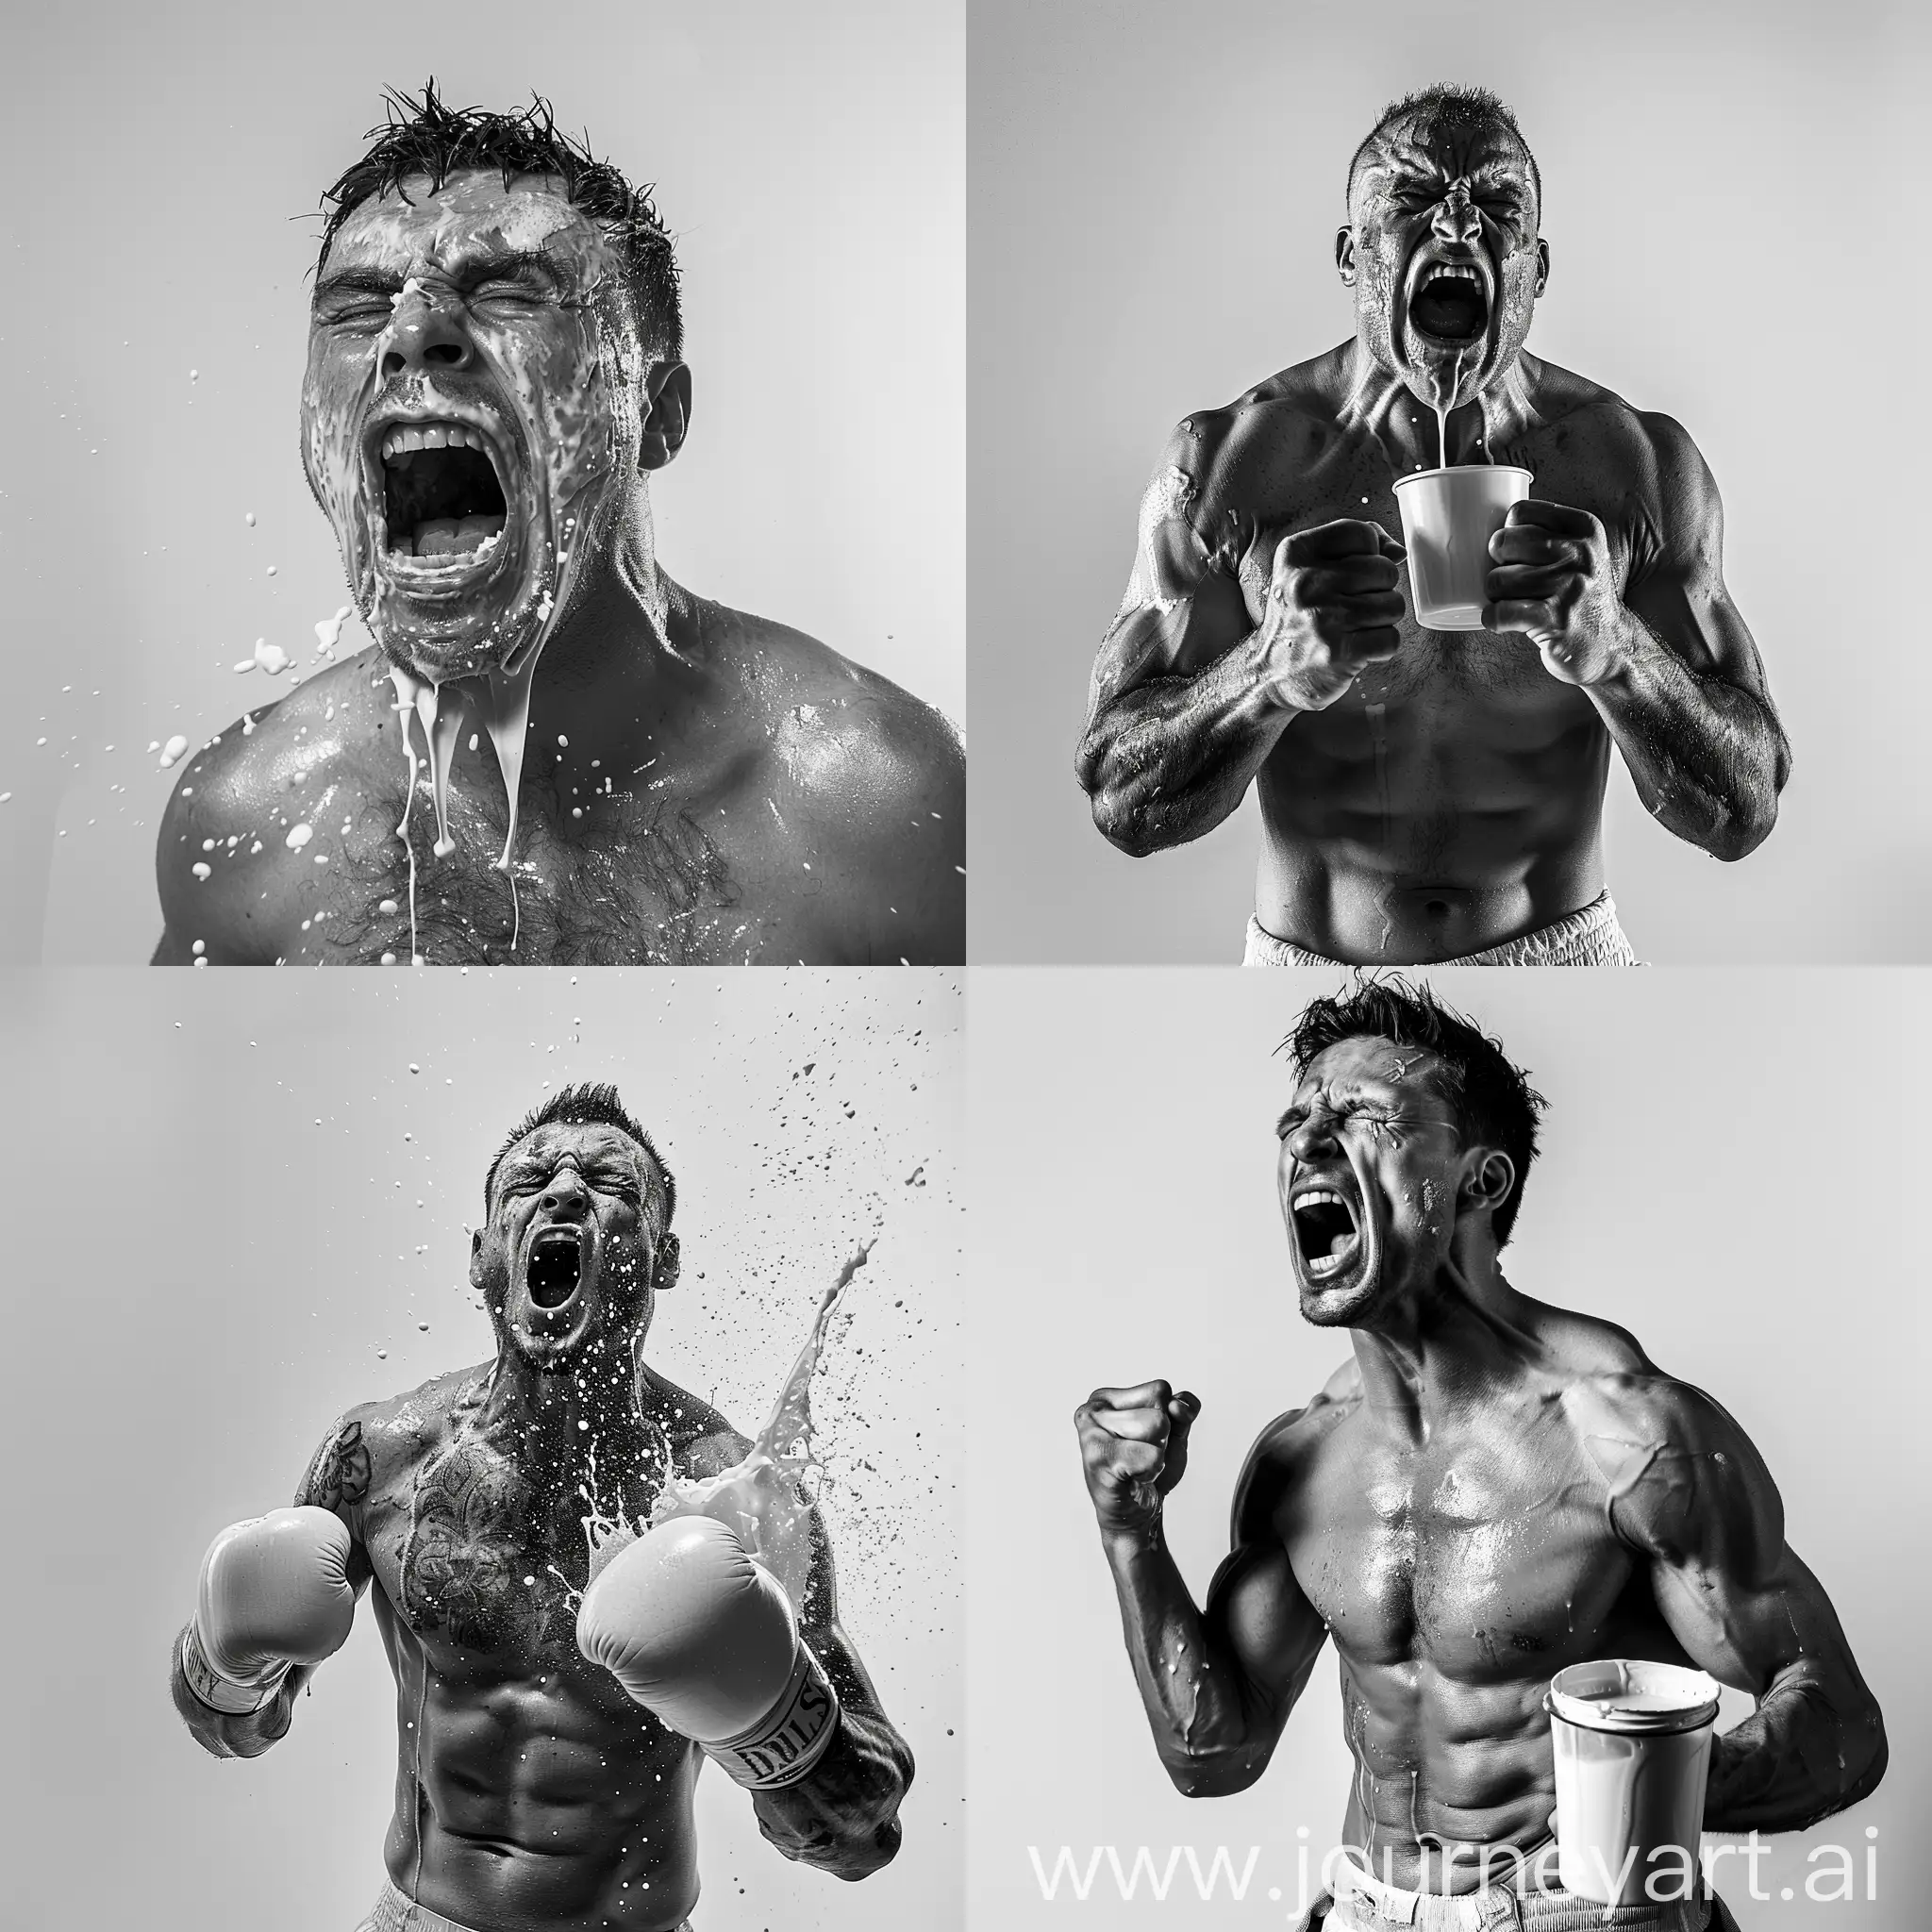 Furious-ExBoxer-Man-Yelling-with-Spoiled-Milk-in-Black-and-White